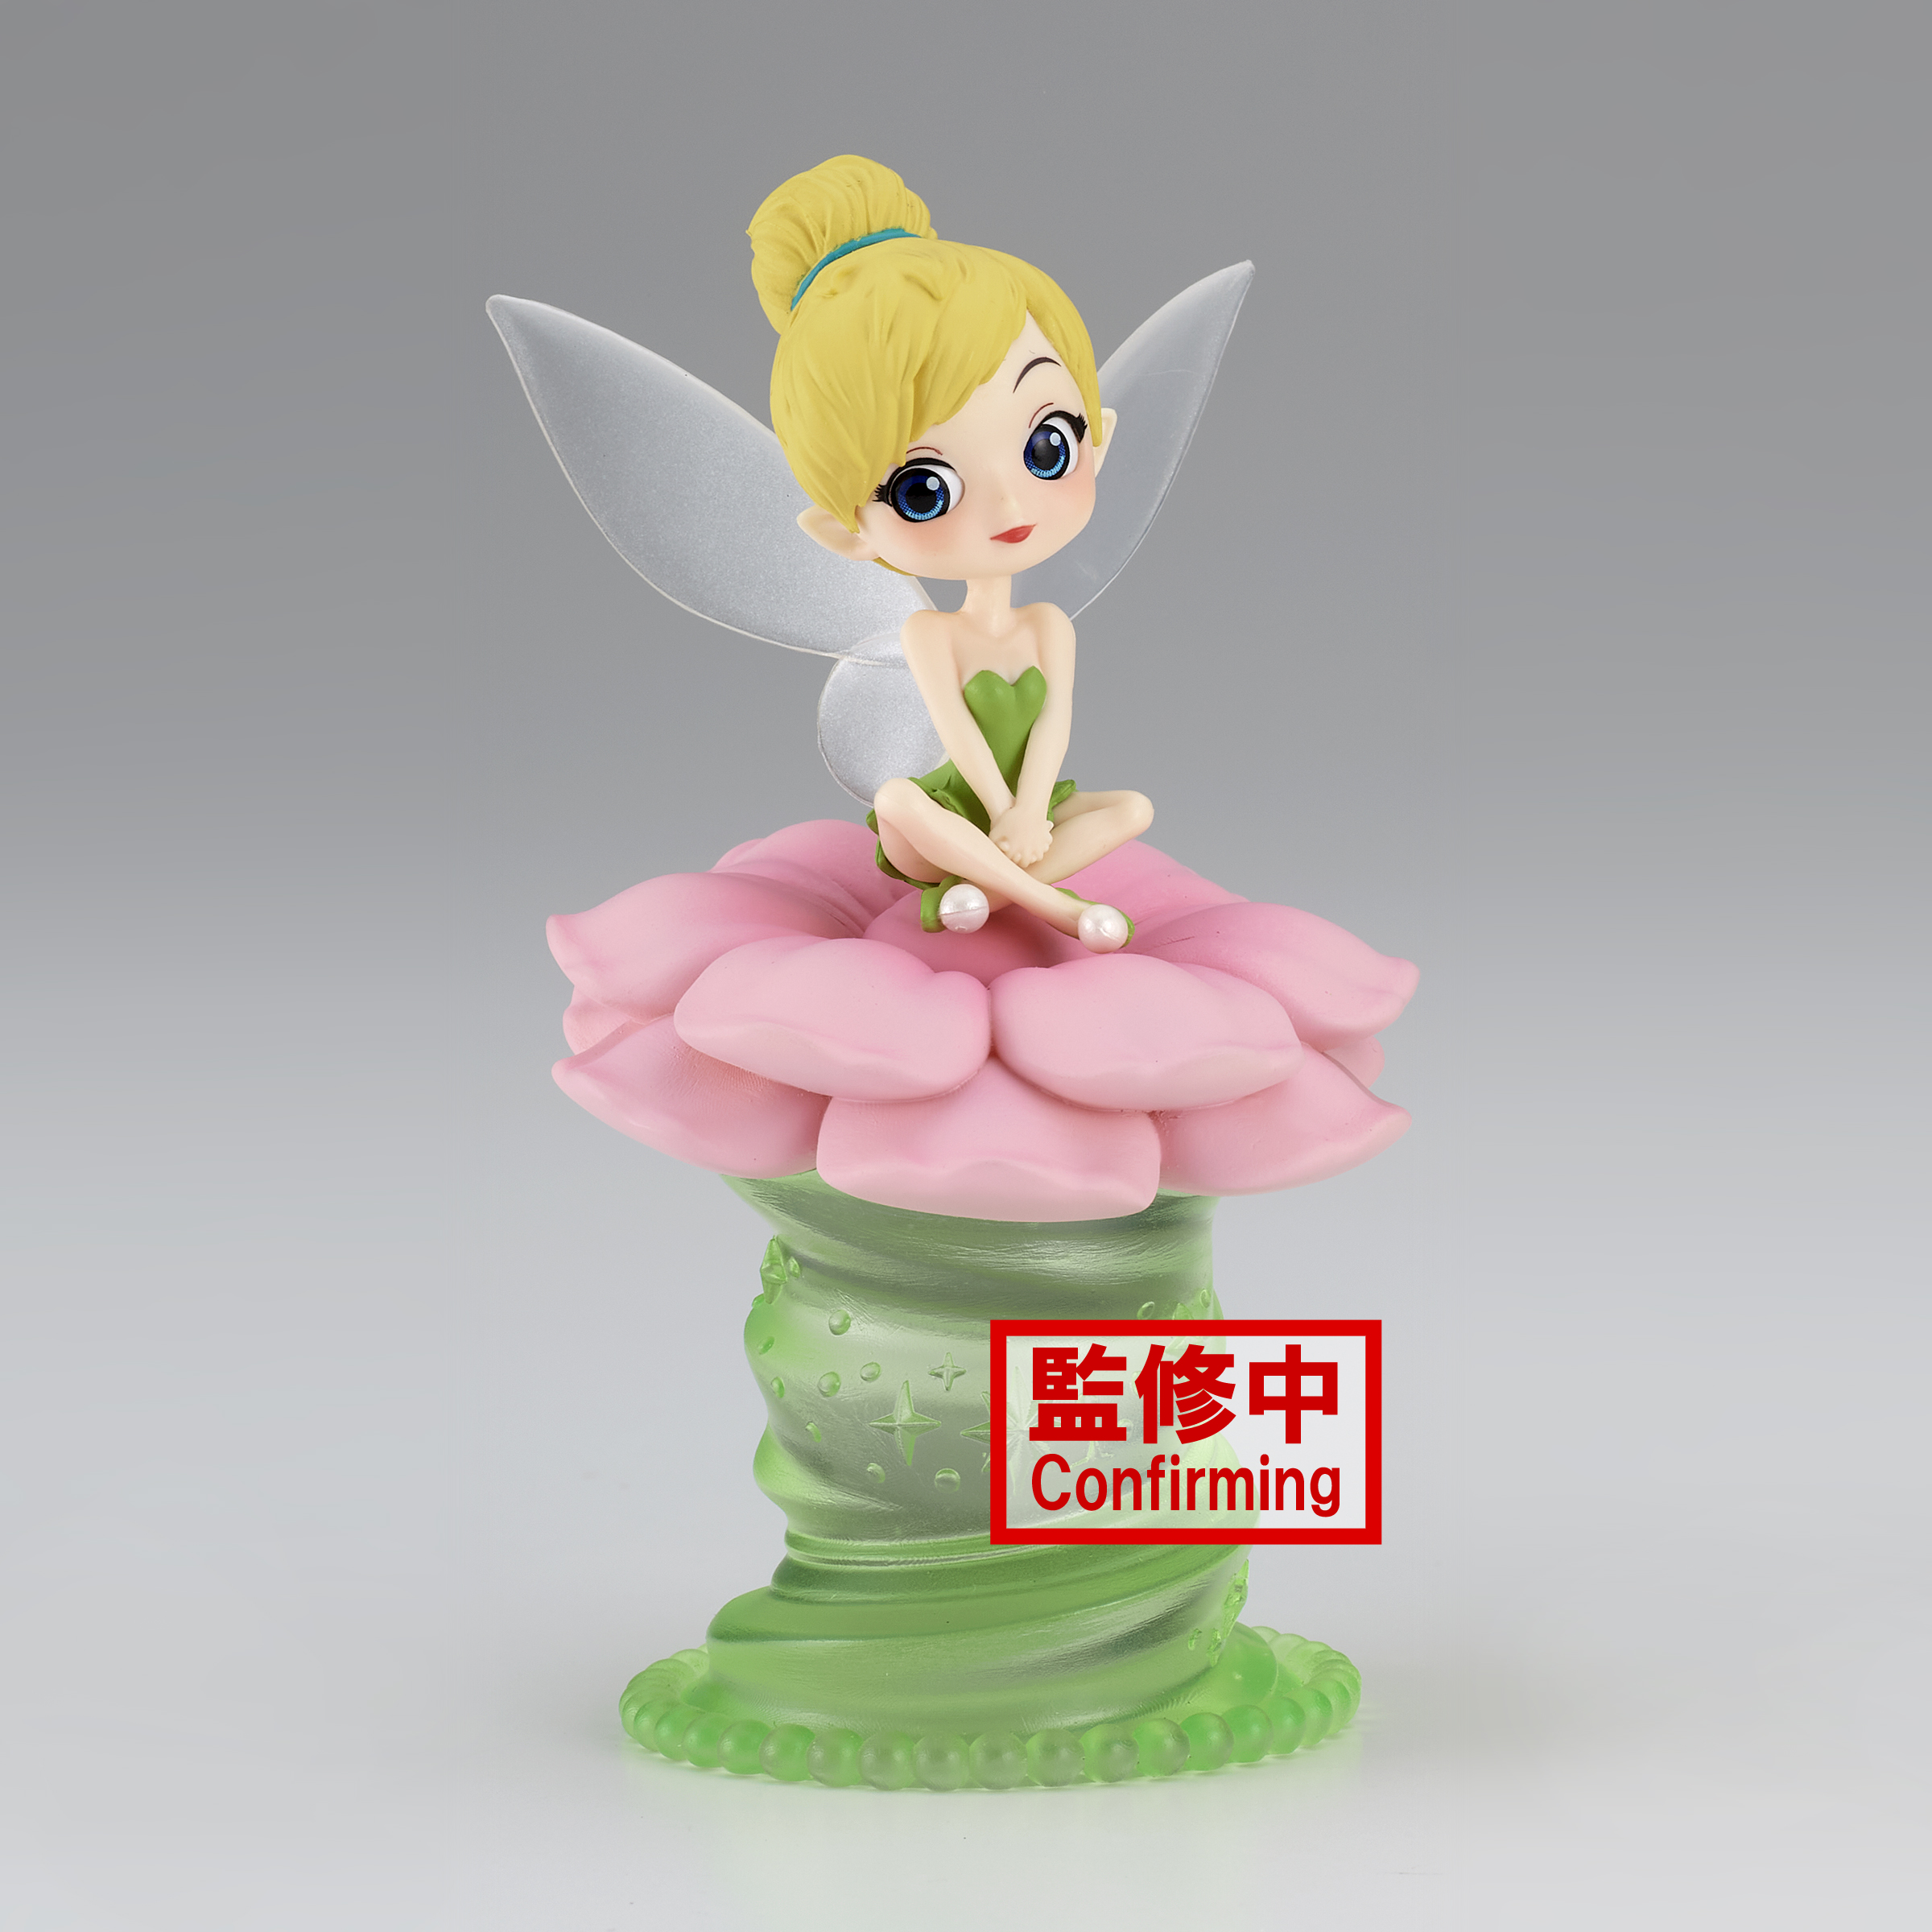 Qposket Details about   Q posket Disney Characters Normal Color Tinker Bell Peter Pan 